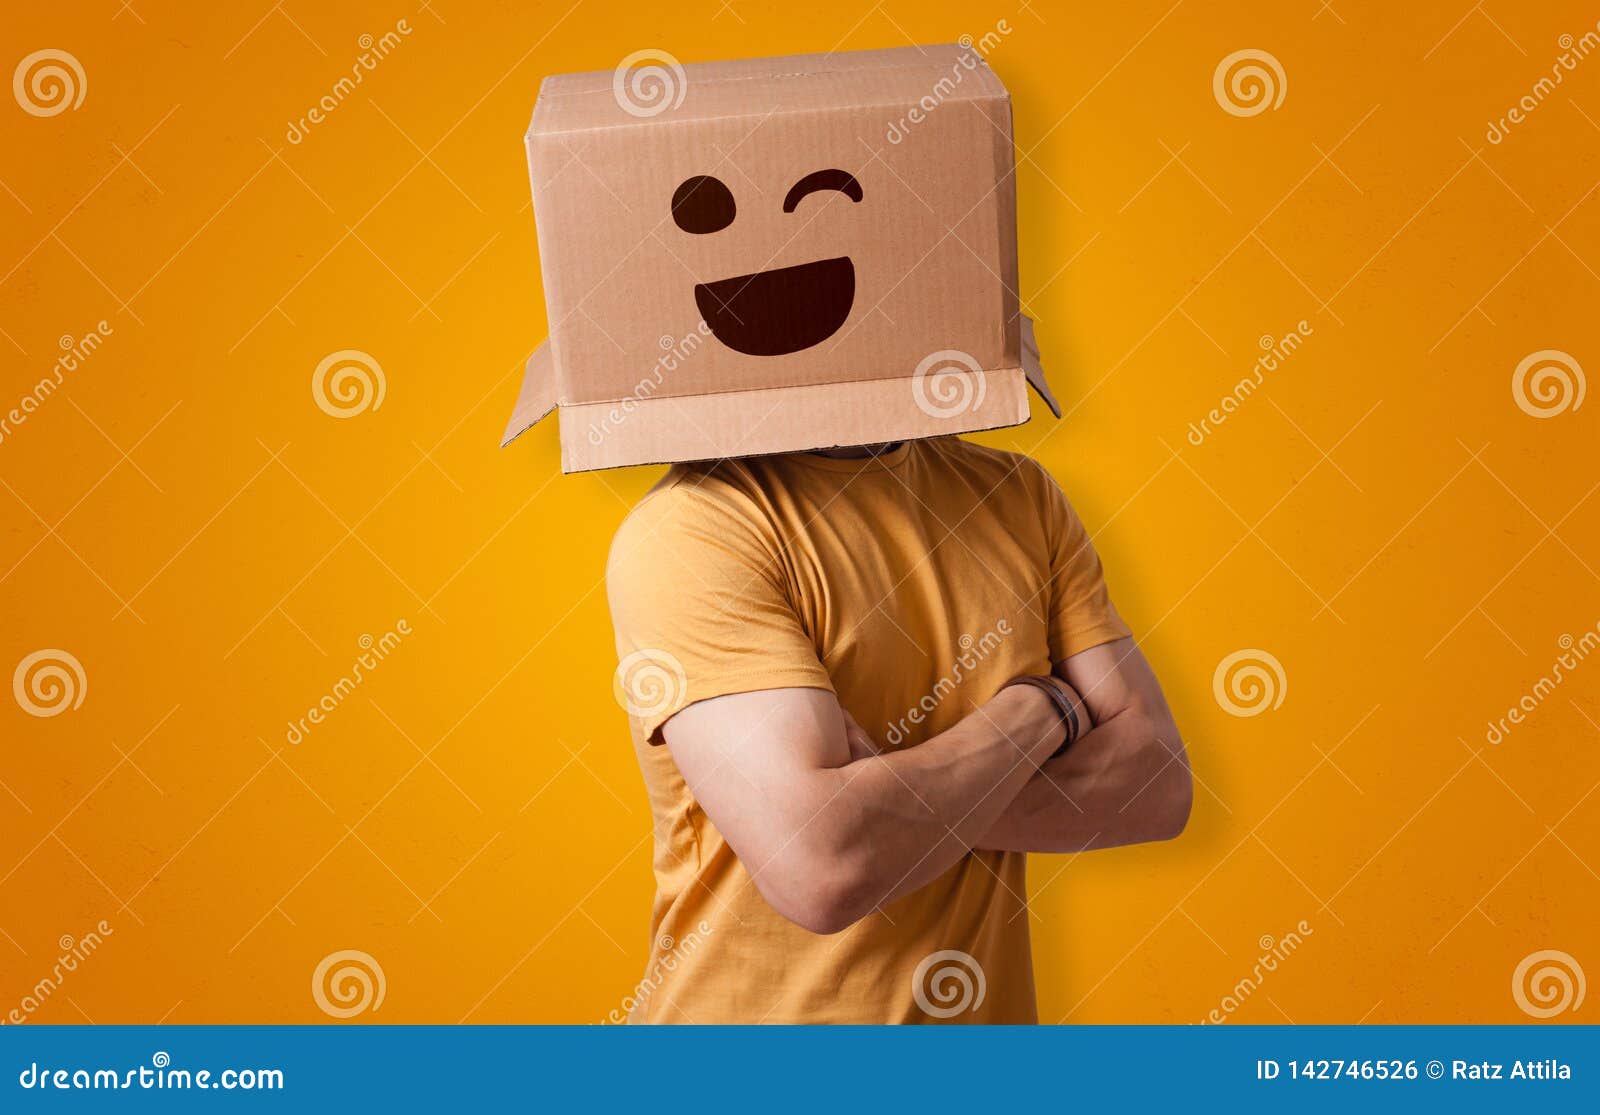 funny man smiling with cardboard box head